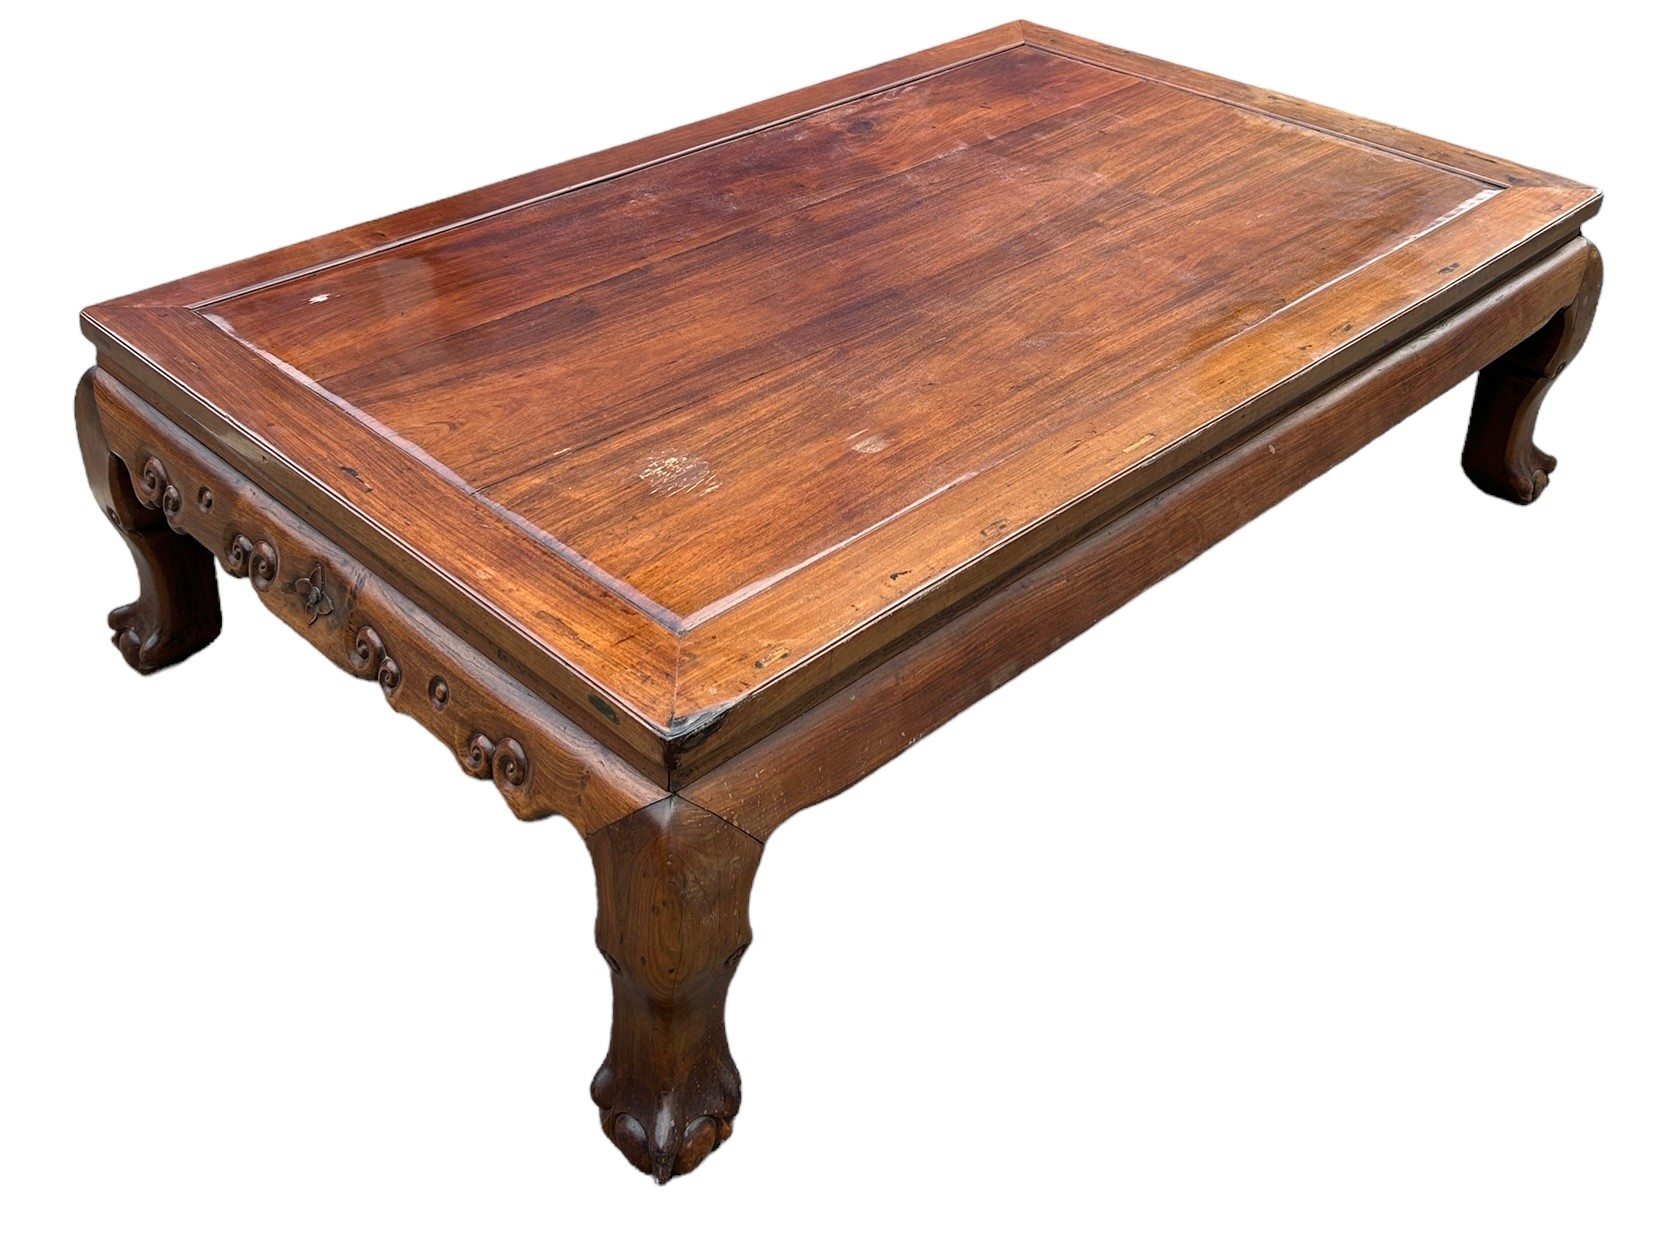 A LARGE CHINESE HONGMU LOW TABLE, Early 20th century, raised on four claw and ball feet. 185cm x